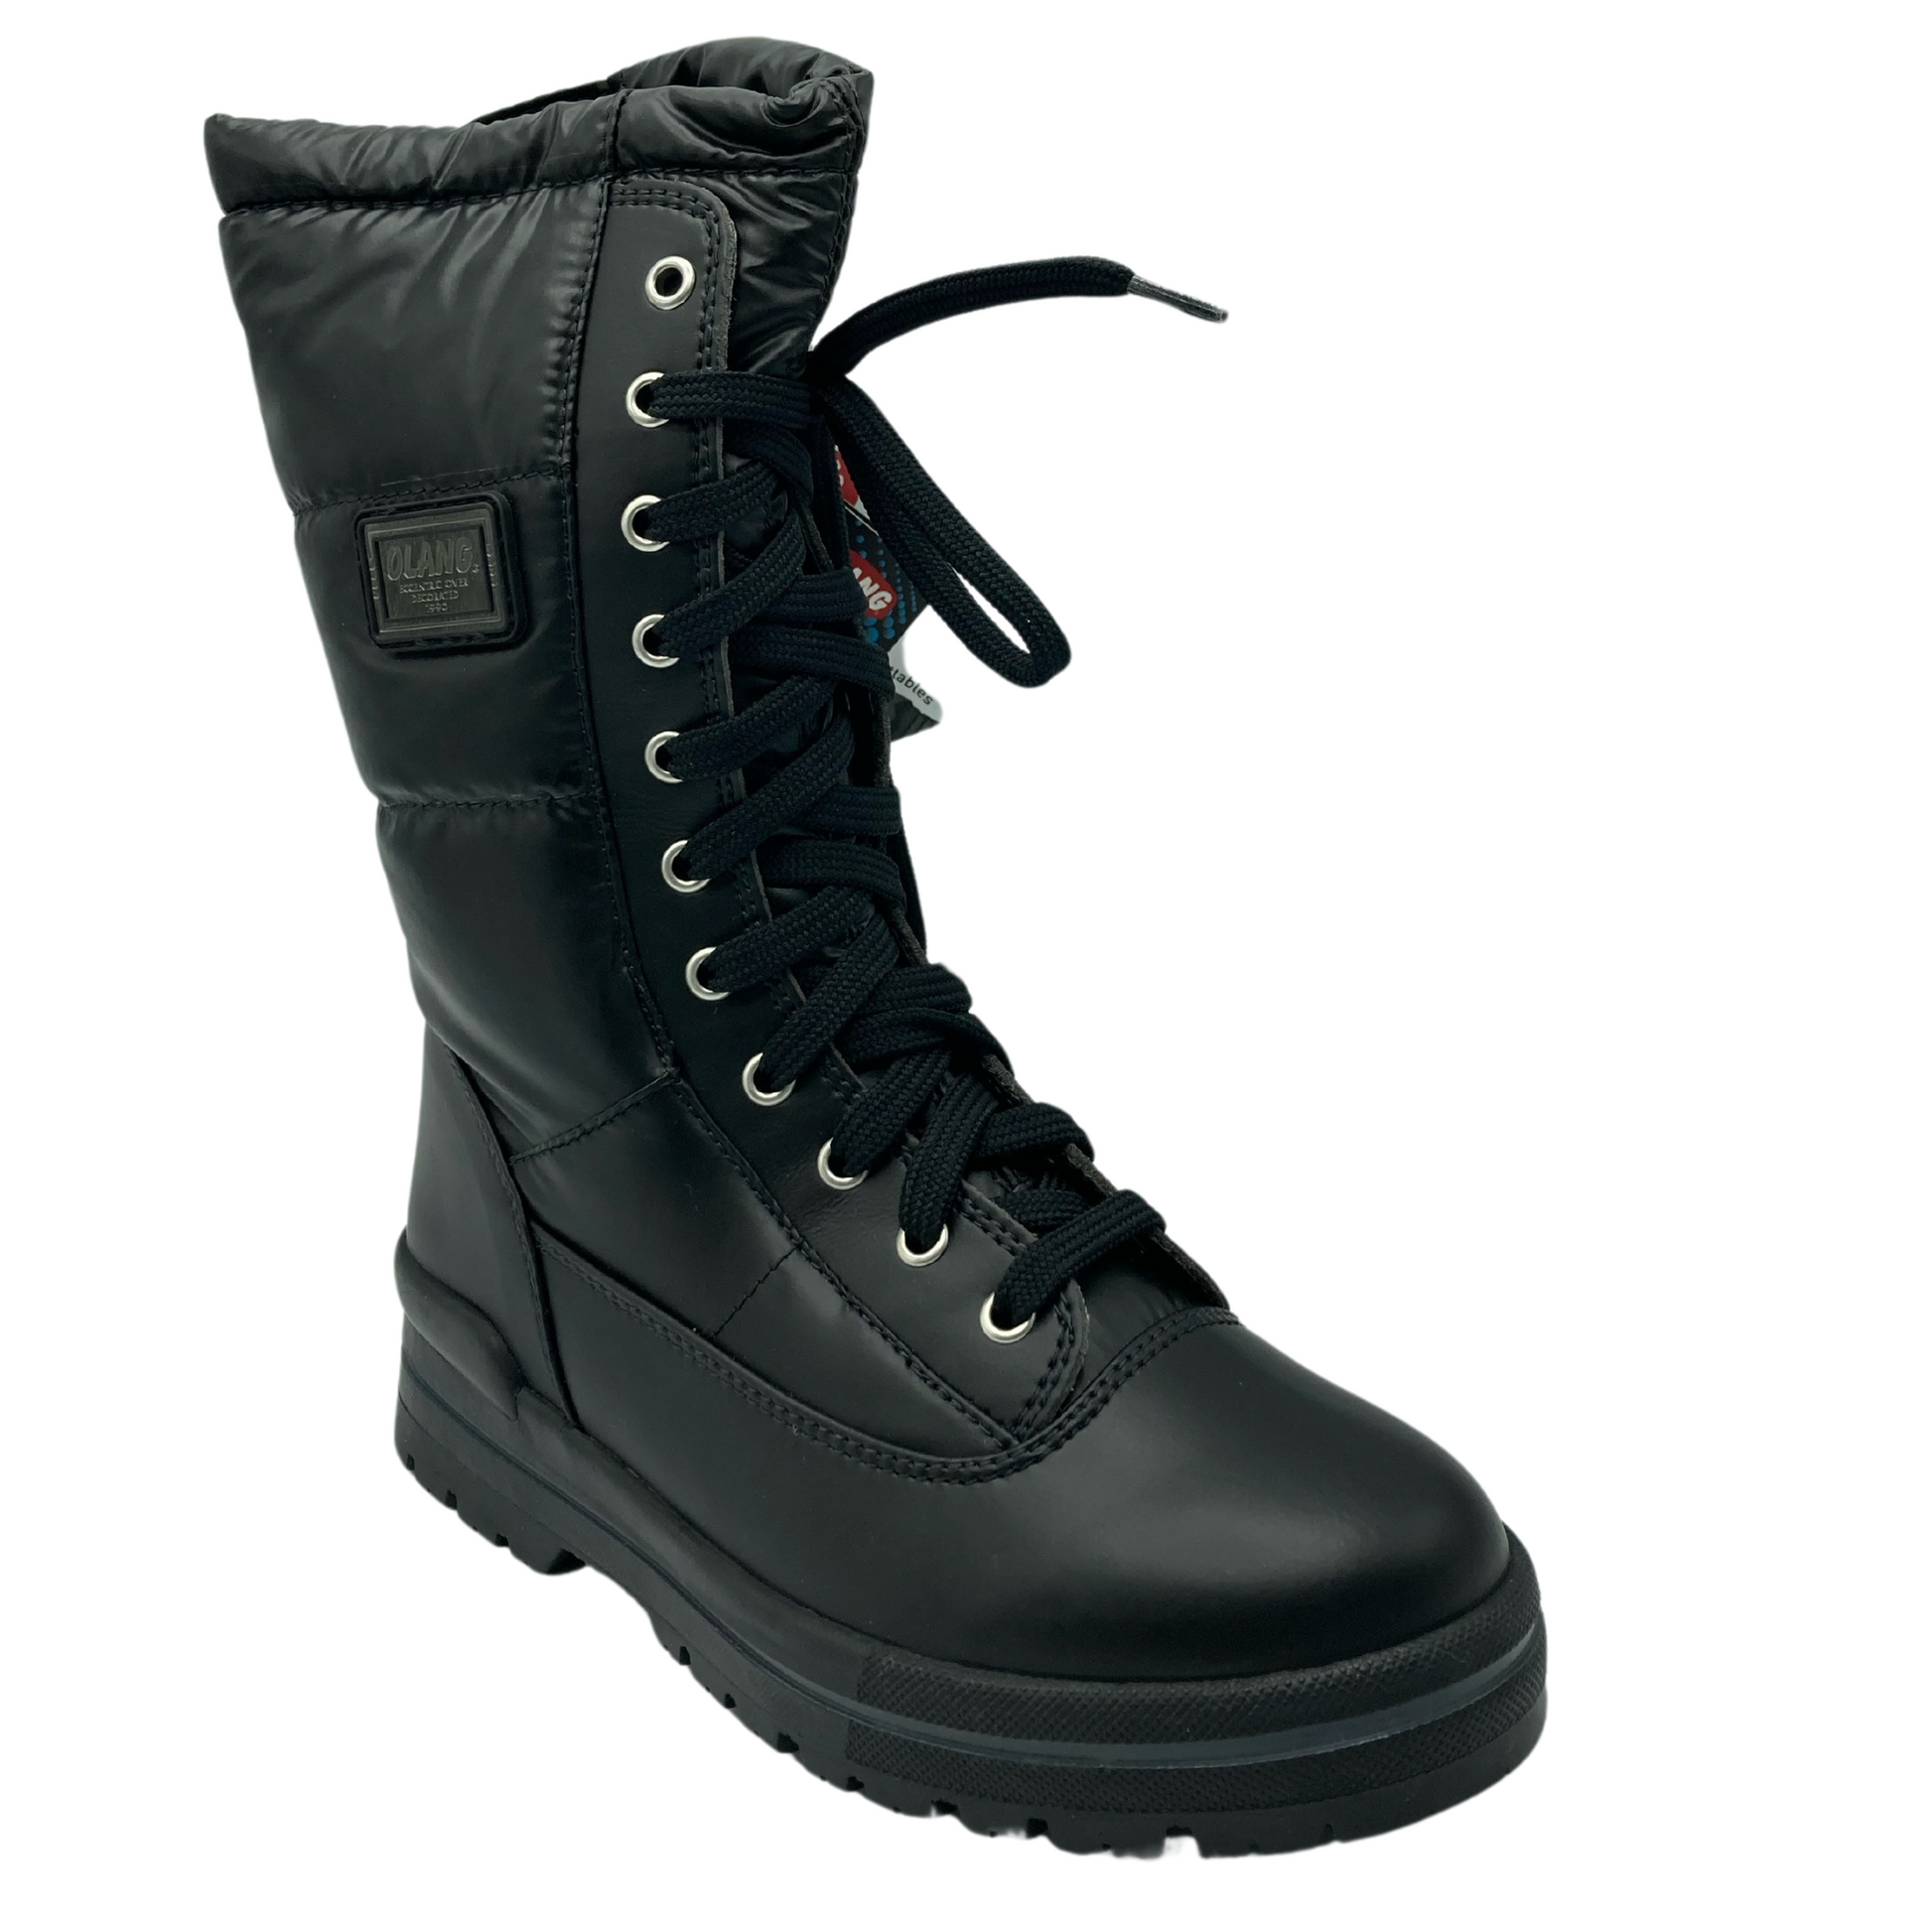 45 degree angled view of black boot with black lace up closure and rubber outsole